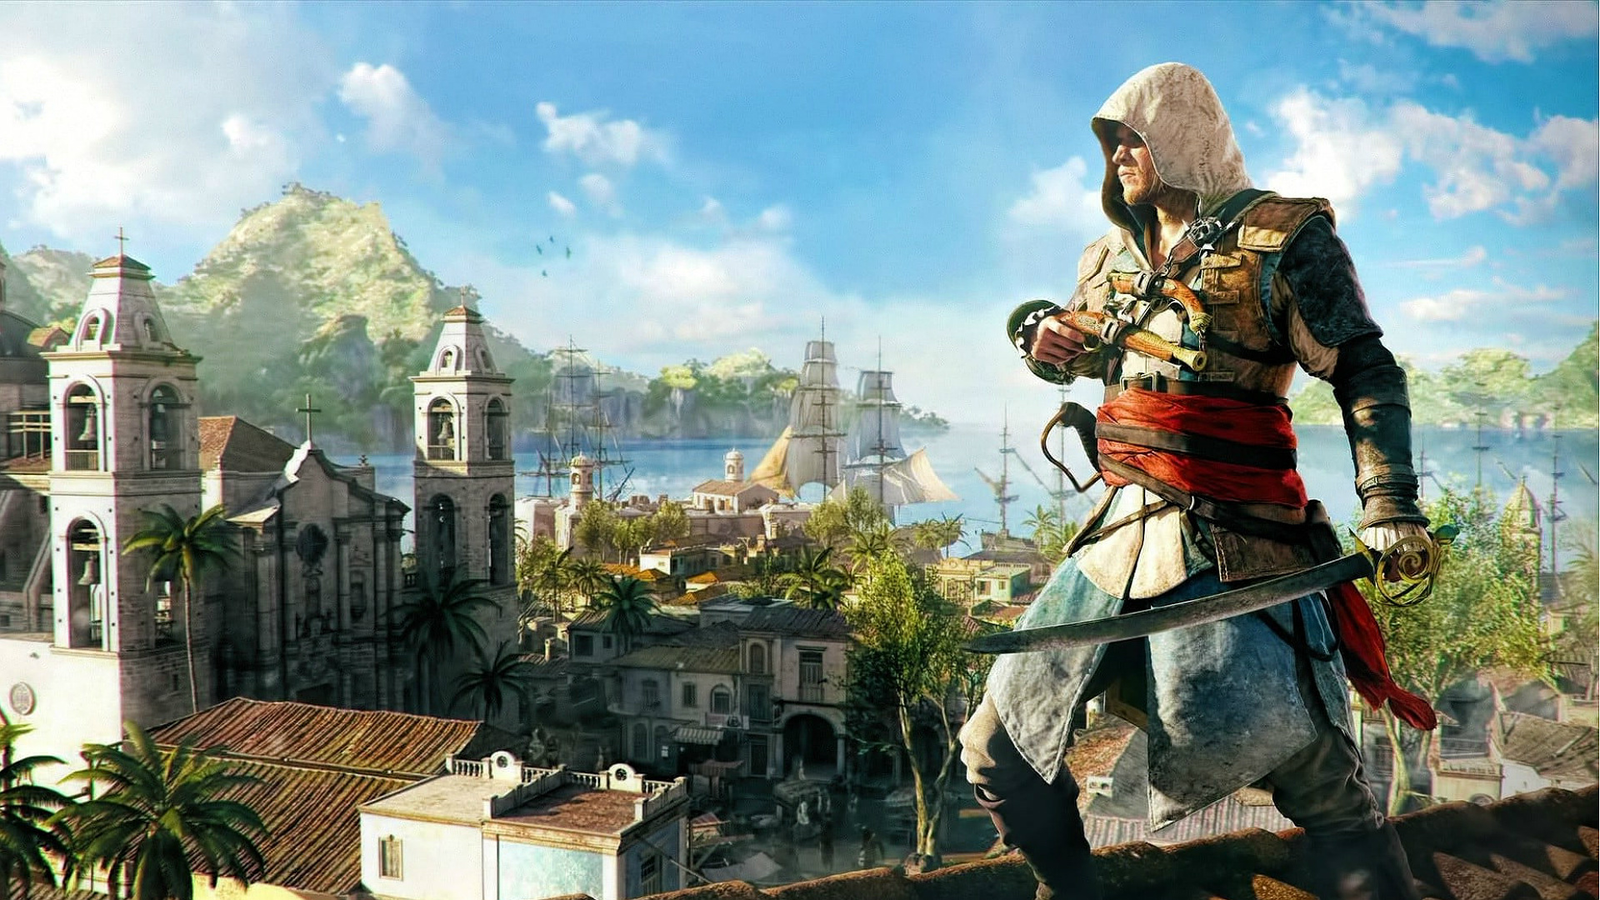 Assassin's Creed: Rebel Collection Review